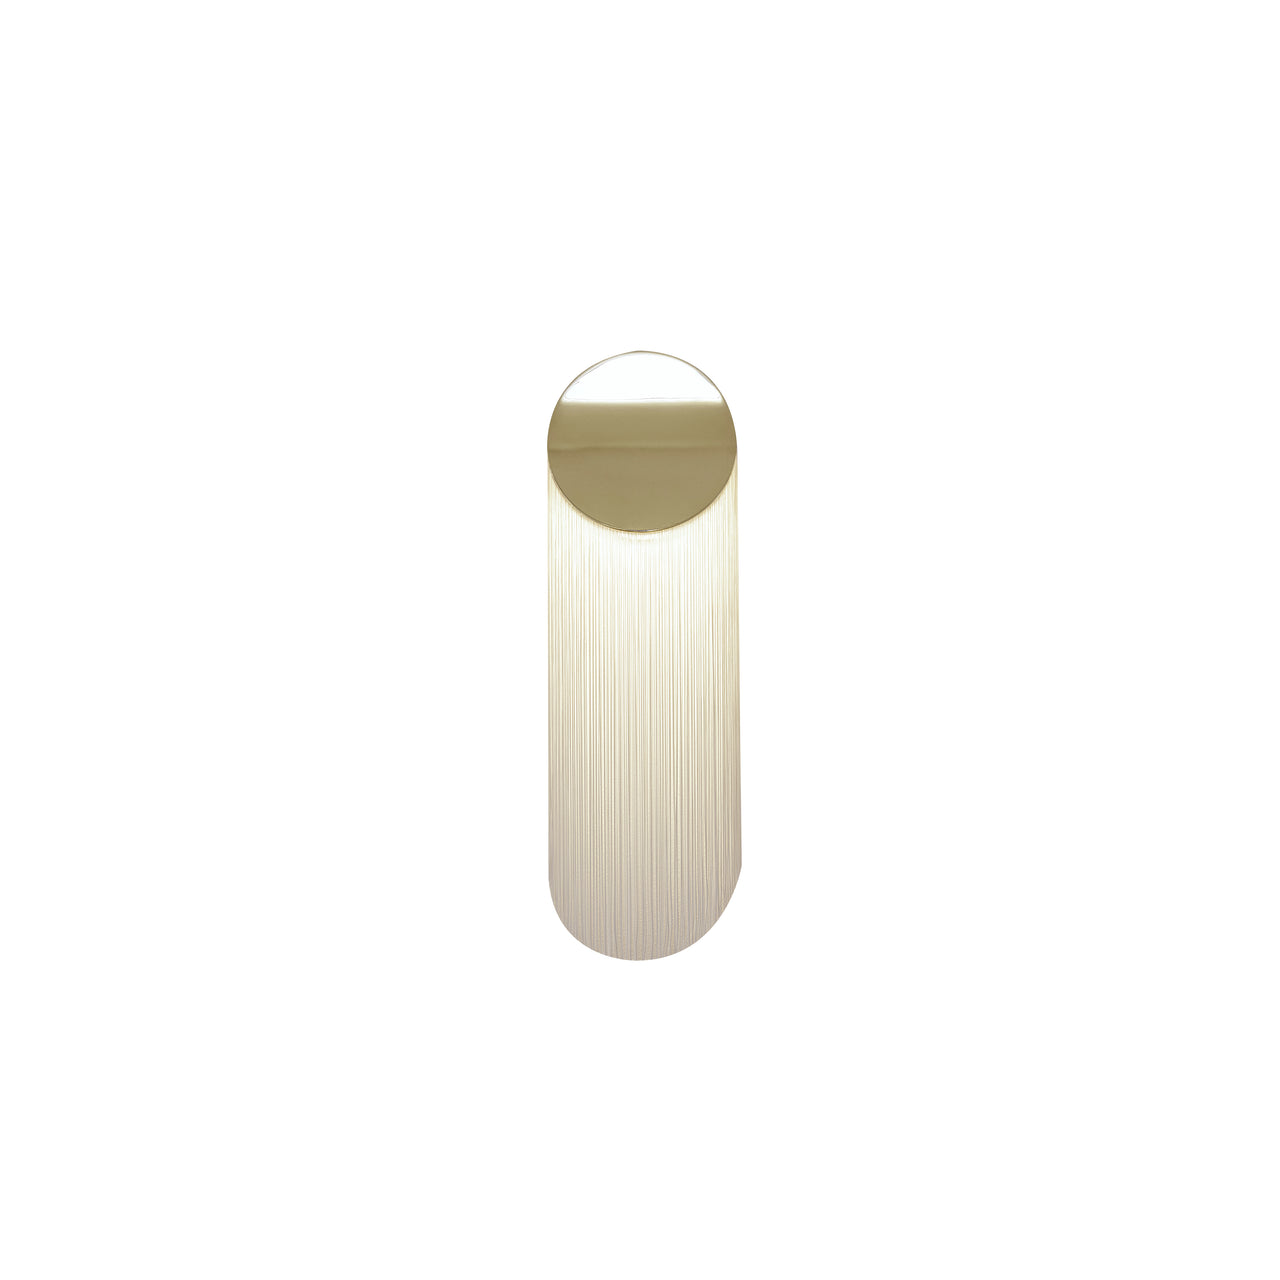 Ce Petite Wall Lamp: Gold + Natural White + Short